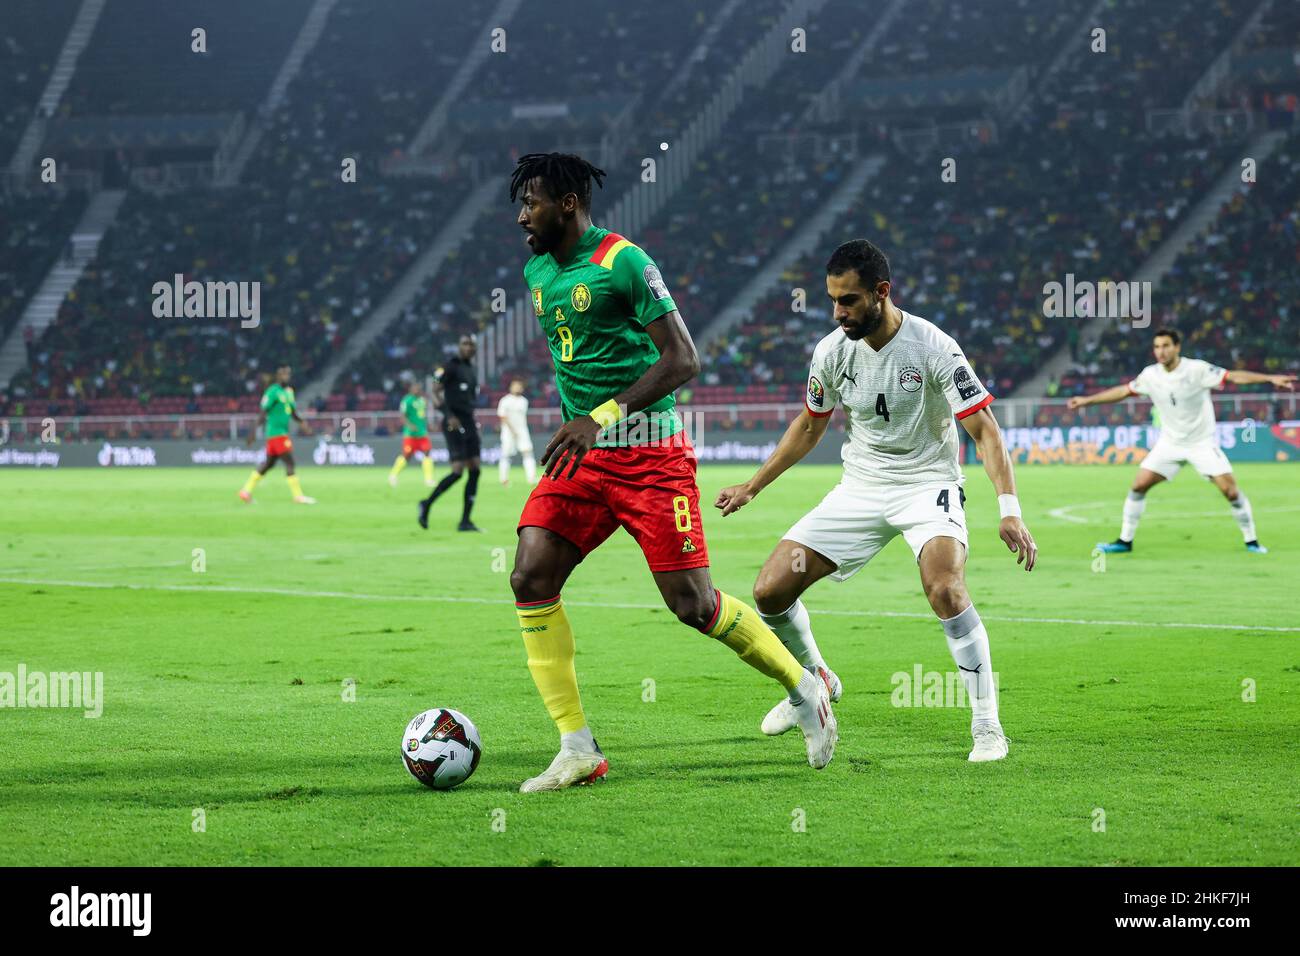 CAMEROON, Yaounde, 03 February 2022 - Amr El Solia of Egypt and Andre Zambo Anguissa of Cameroon during the Africa Cup of Nations play offs semi final match between Cameroon and Egypt at Stade d'Olembe, Yaounde, Cameroon, 03/02/2022/ Photo by SF Credit: Sebo47/Alamy Live News Stock Photo